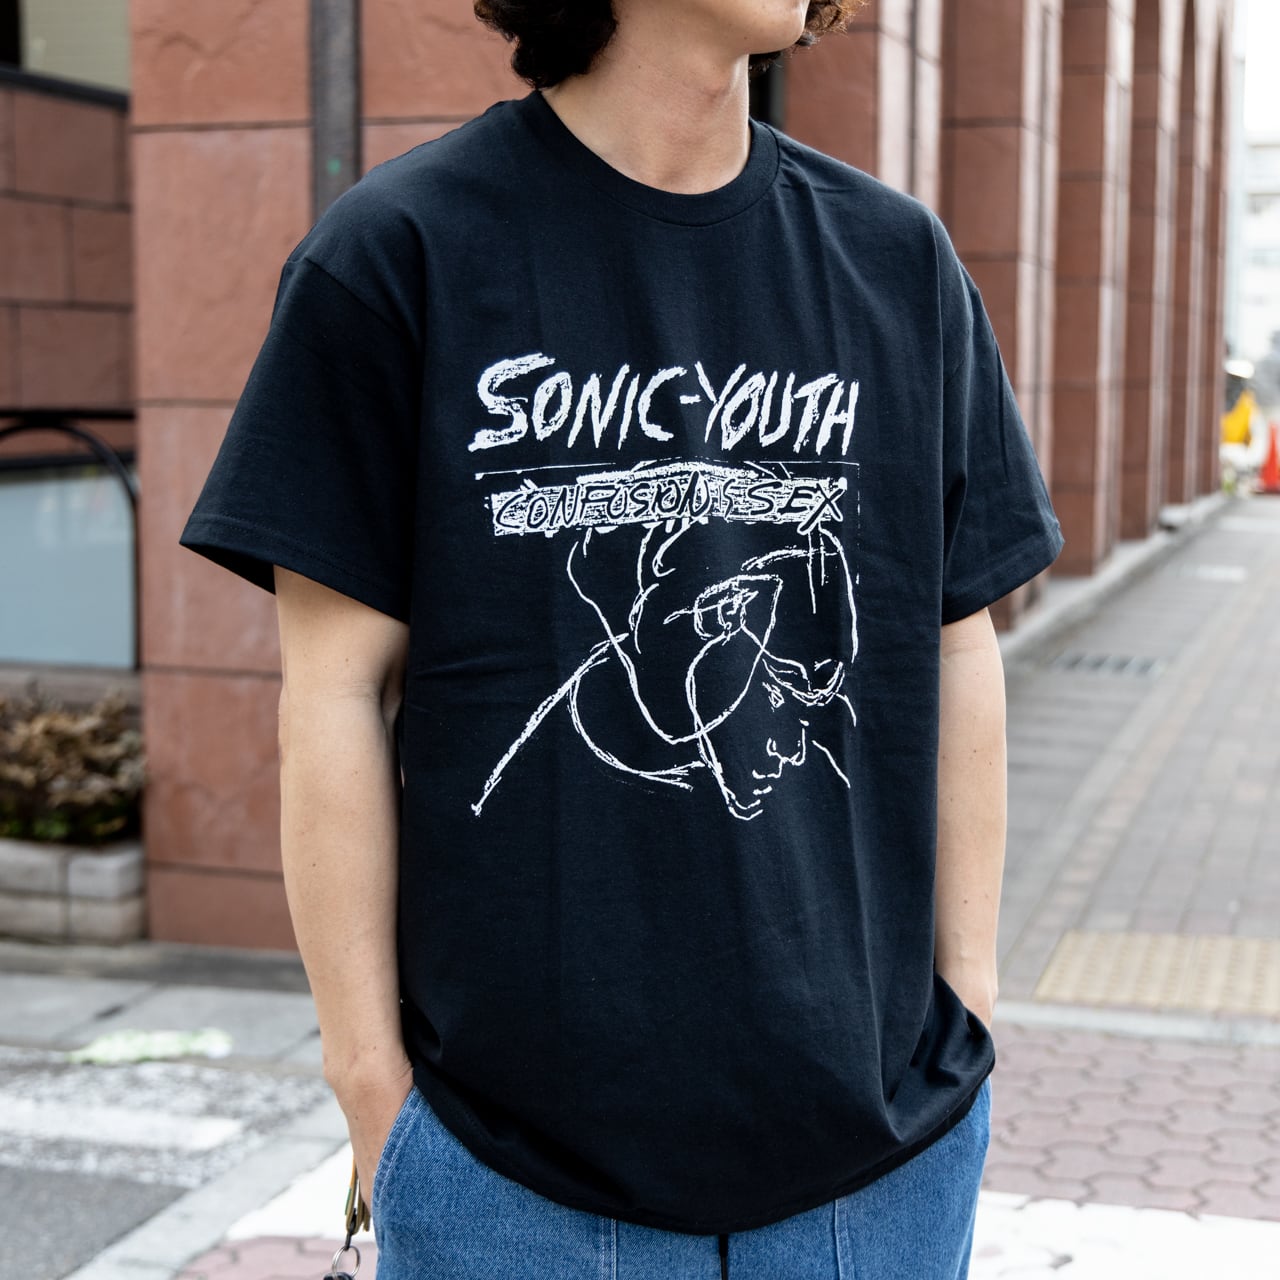 Sonic Youth Confusion Is Sex ソニックユースTシャツ